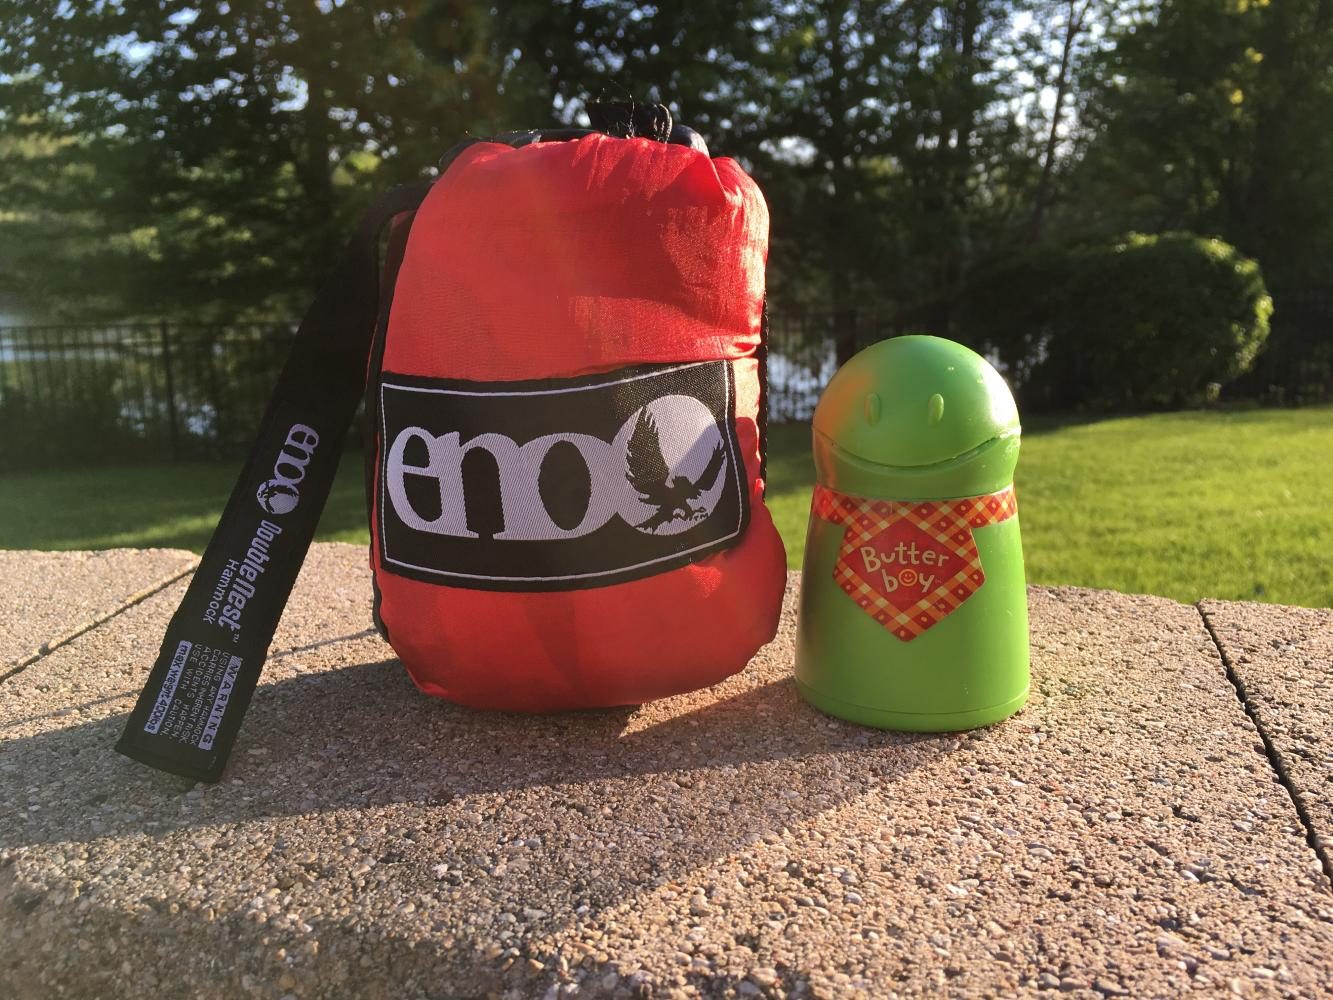 The ENO Hammock and Butter Boy are two simple ways to make a more relaxing summer. The ENO hammock costs approximately $100, and the Butter Boy is $8